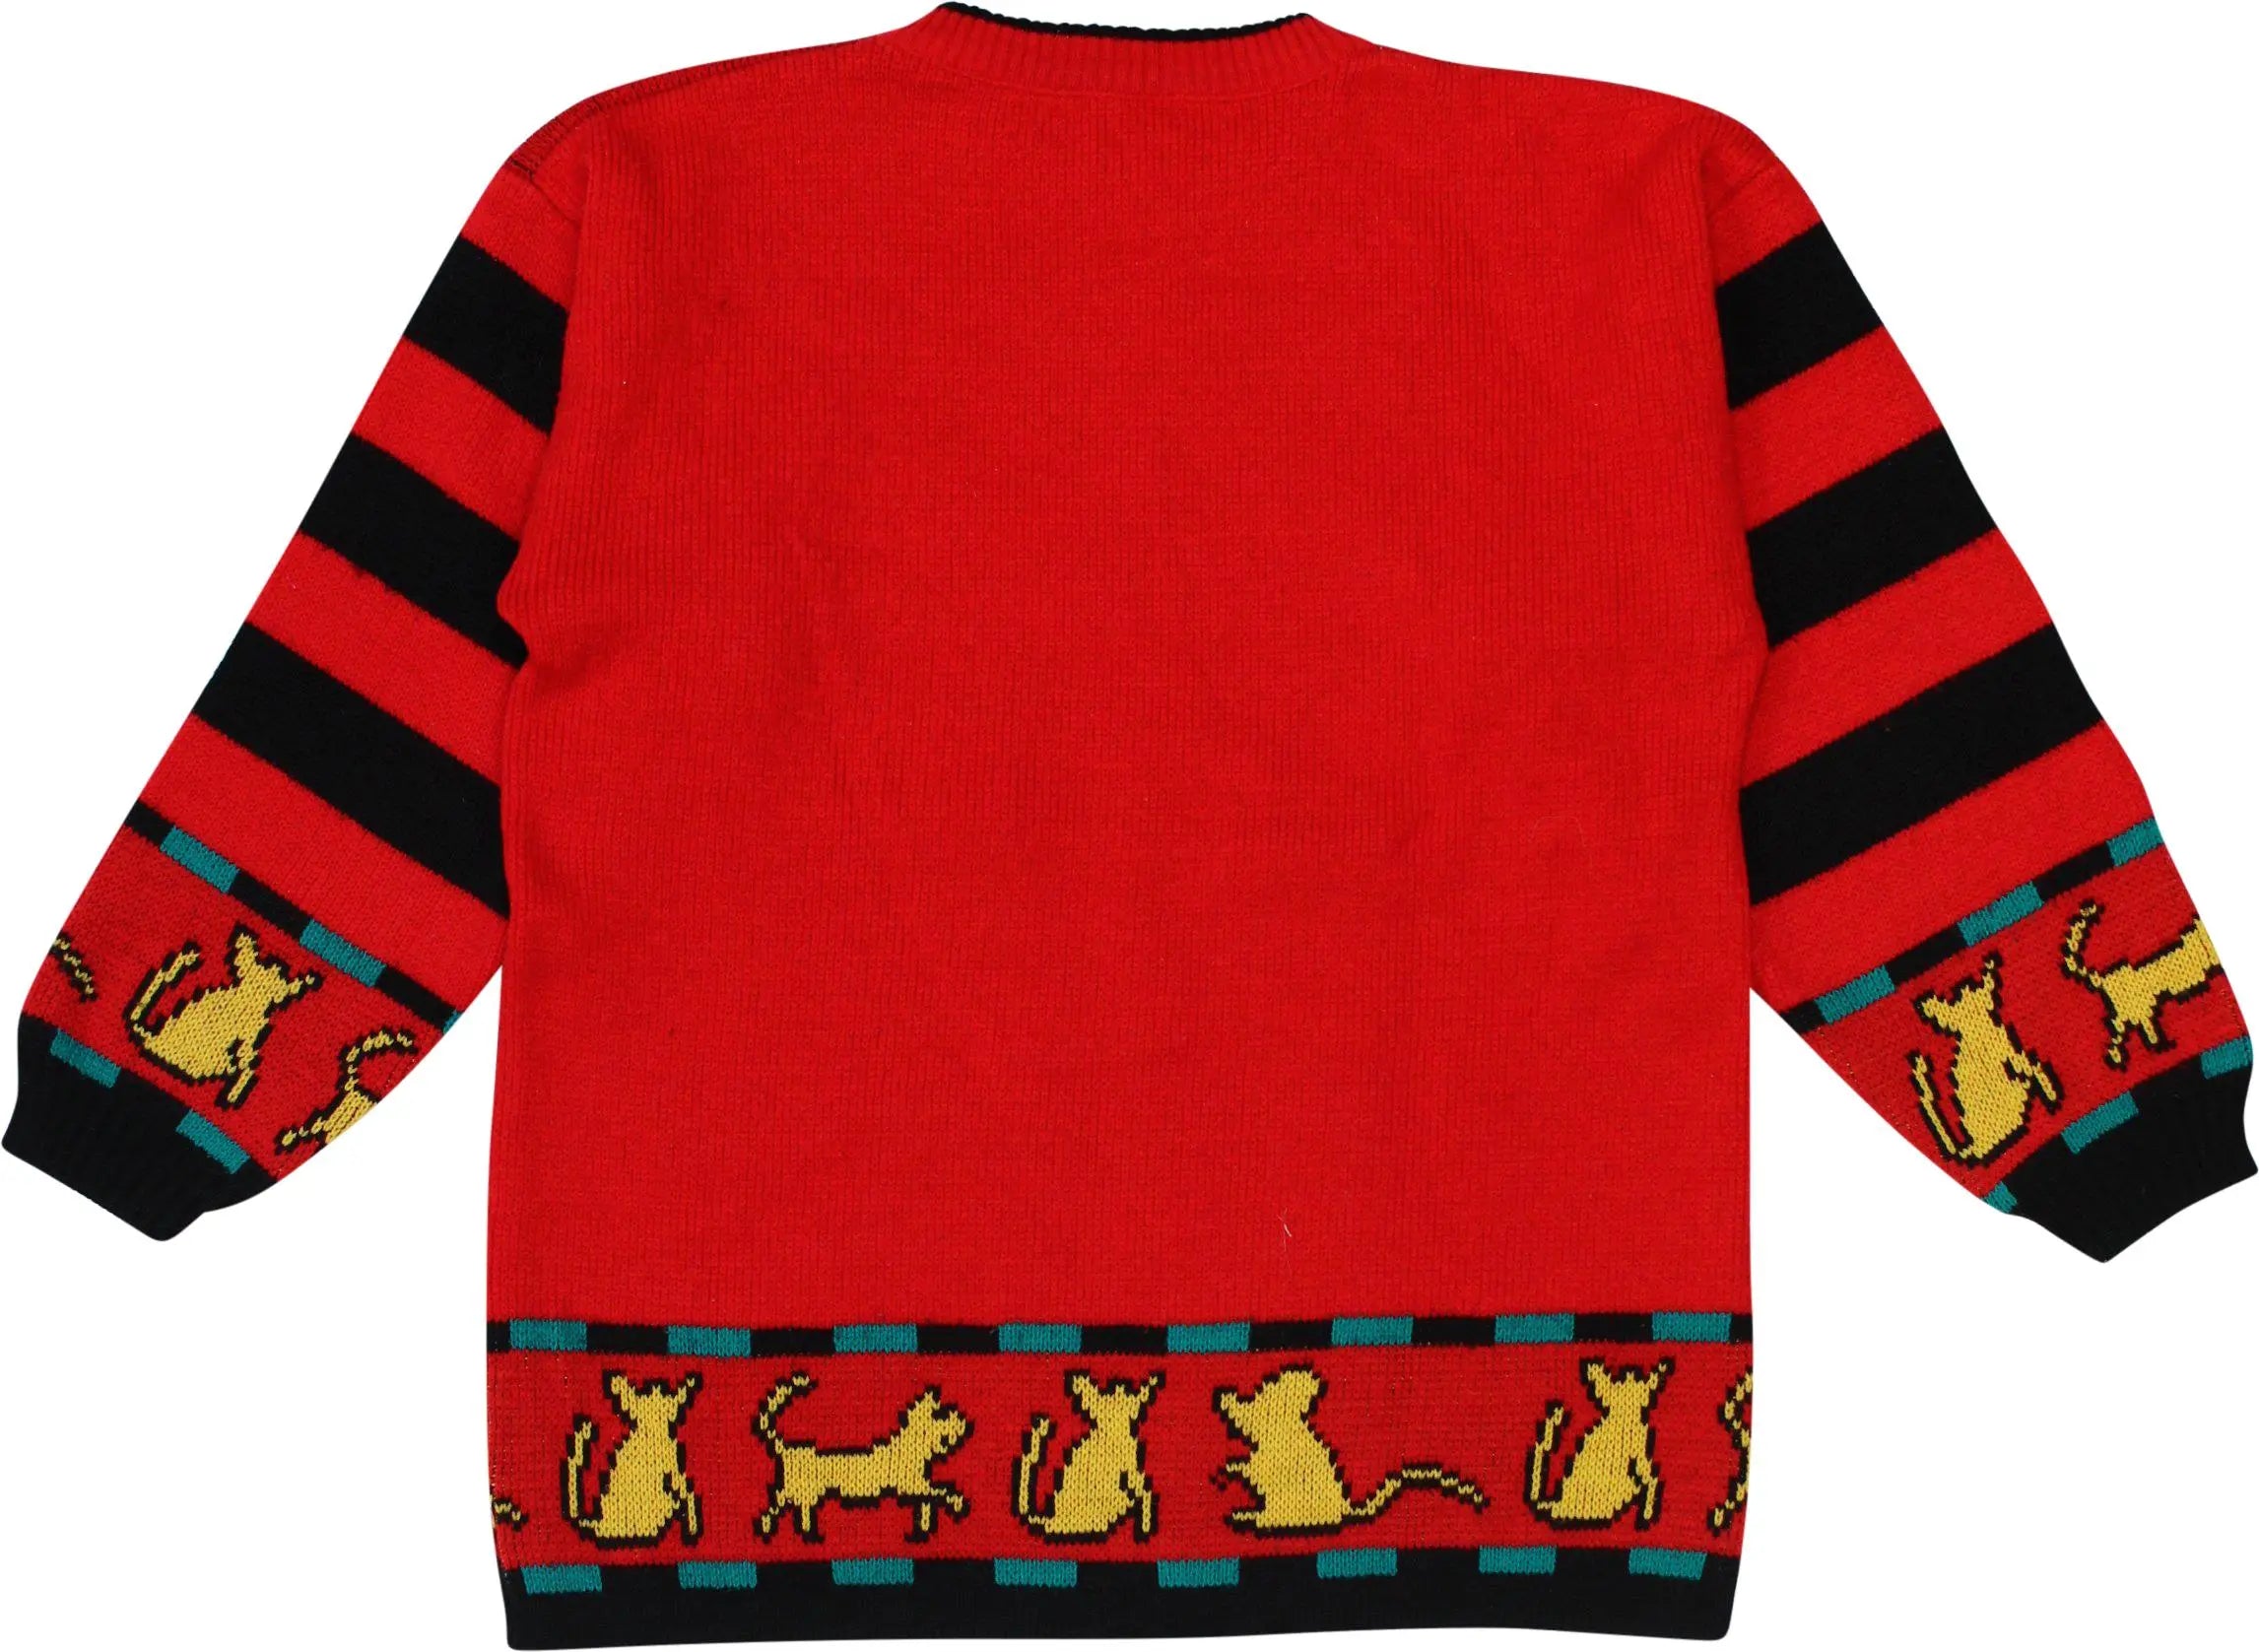 C&A - Red Printed Knitted Sweater- ThriftTale.com - Vintage and second handclothing